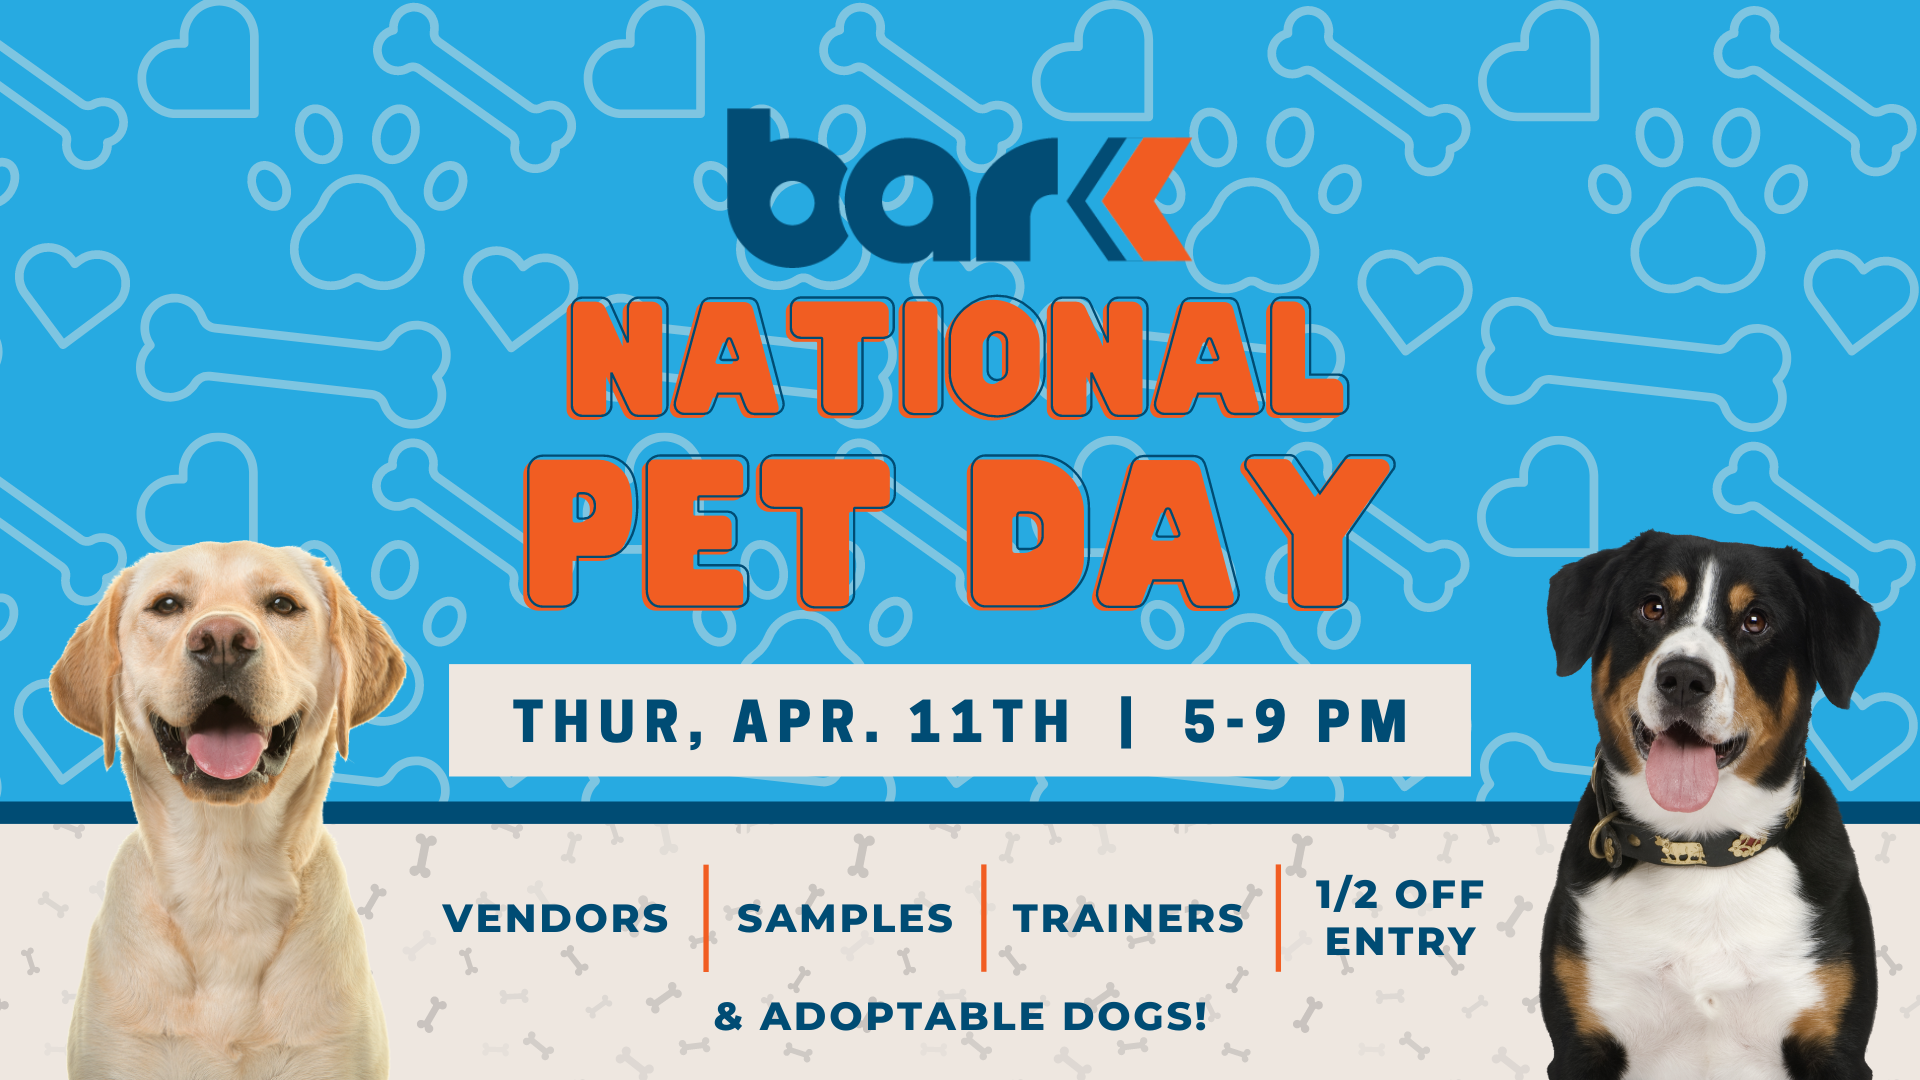 Bar K national pet day. Thursday, April 11th from 5 to 9 pm. Vendors, samples, trainers, 1/2 off entry and adoptable dogs.